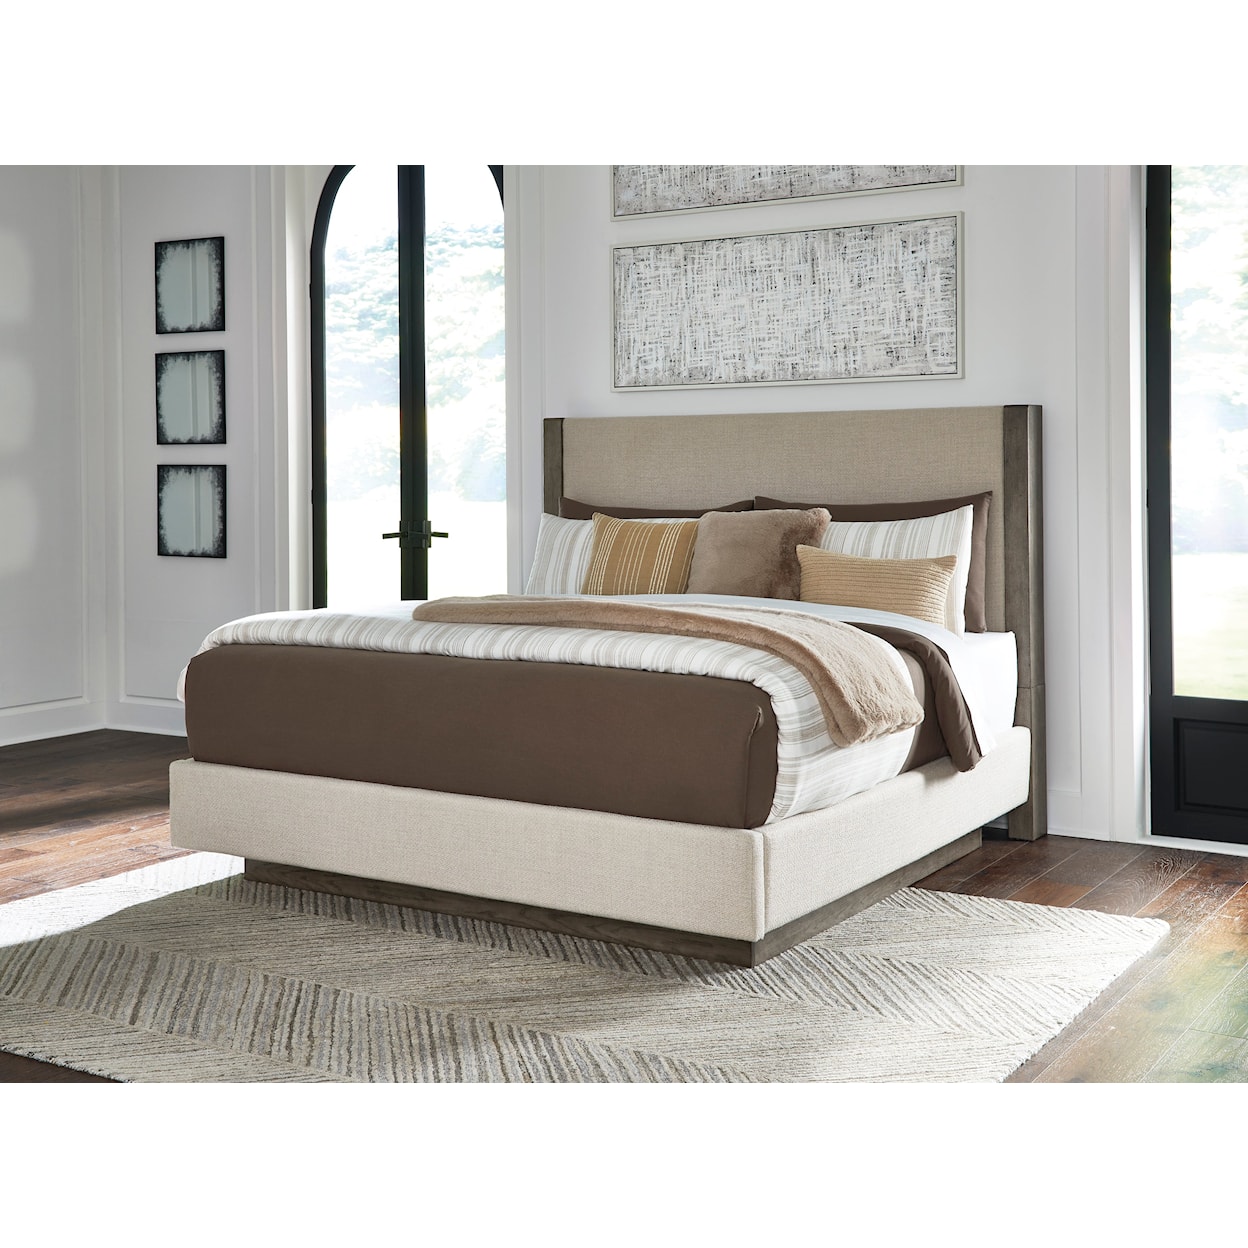 Benchcraft Anibecca California King Upholstered Bed